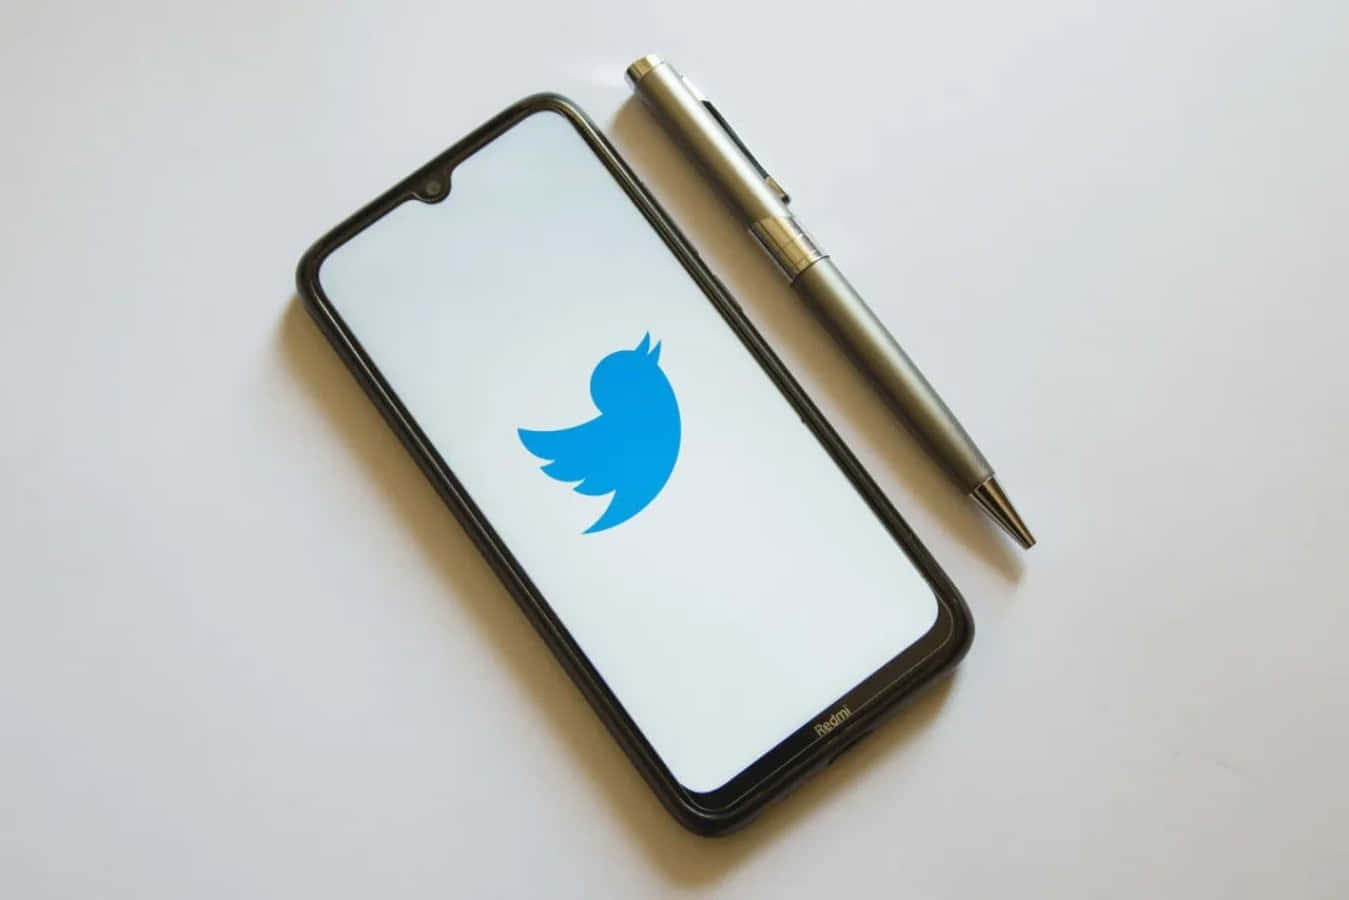 Twitter Logo On A Smartphone With A Pen